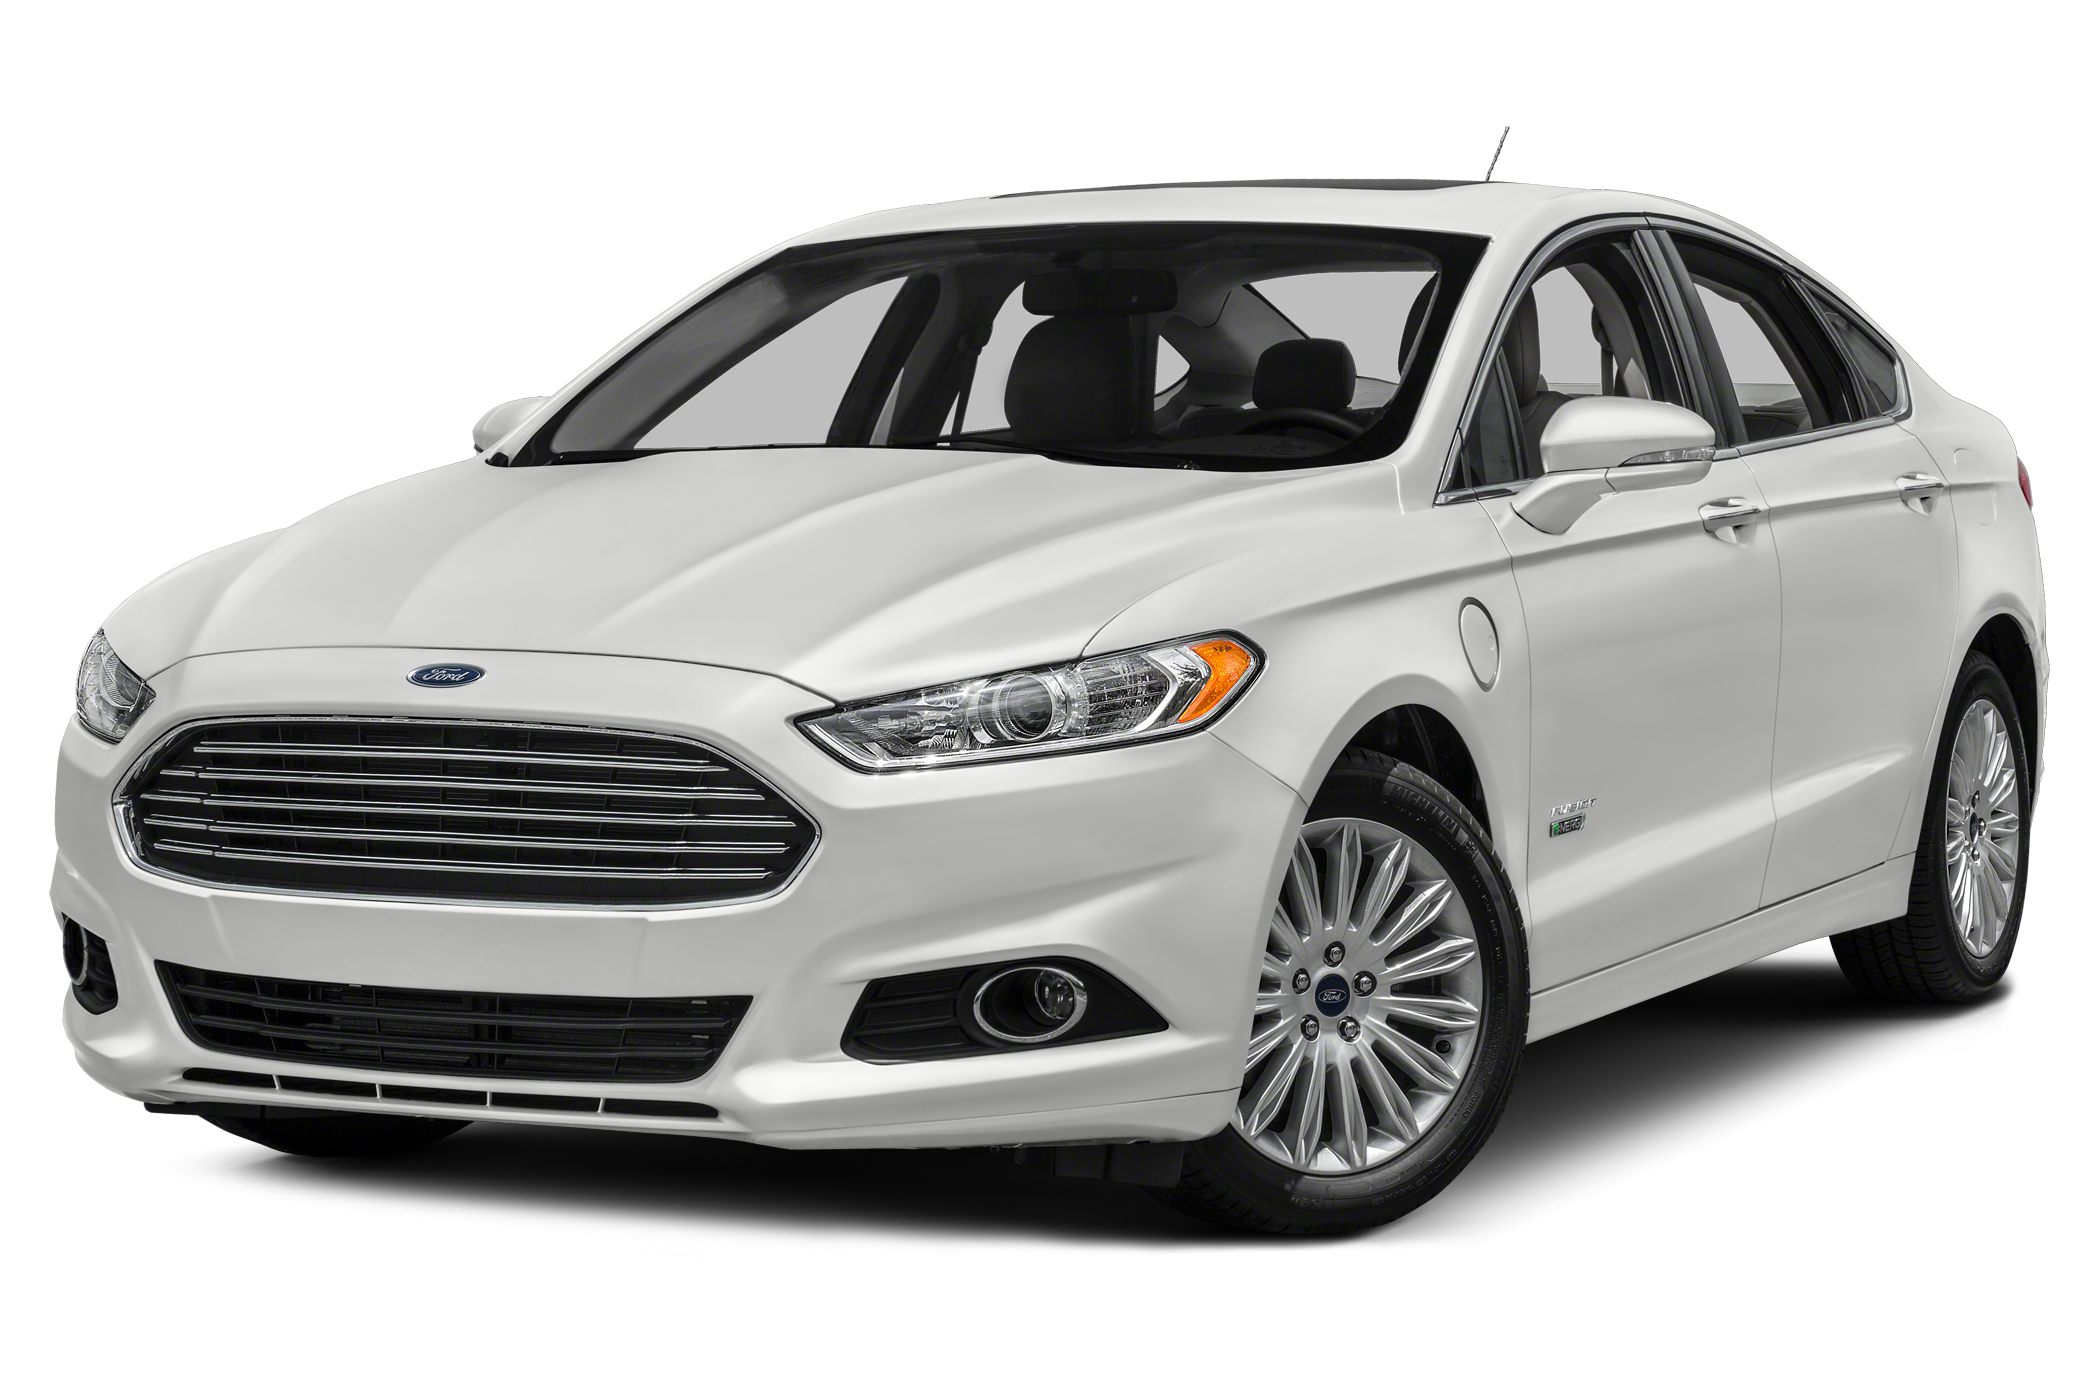 2014 Ford Fusion oem parts and accessories on sale